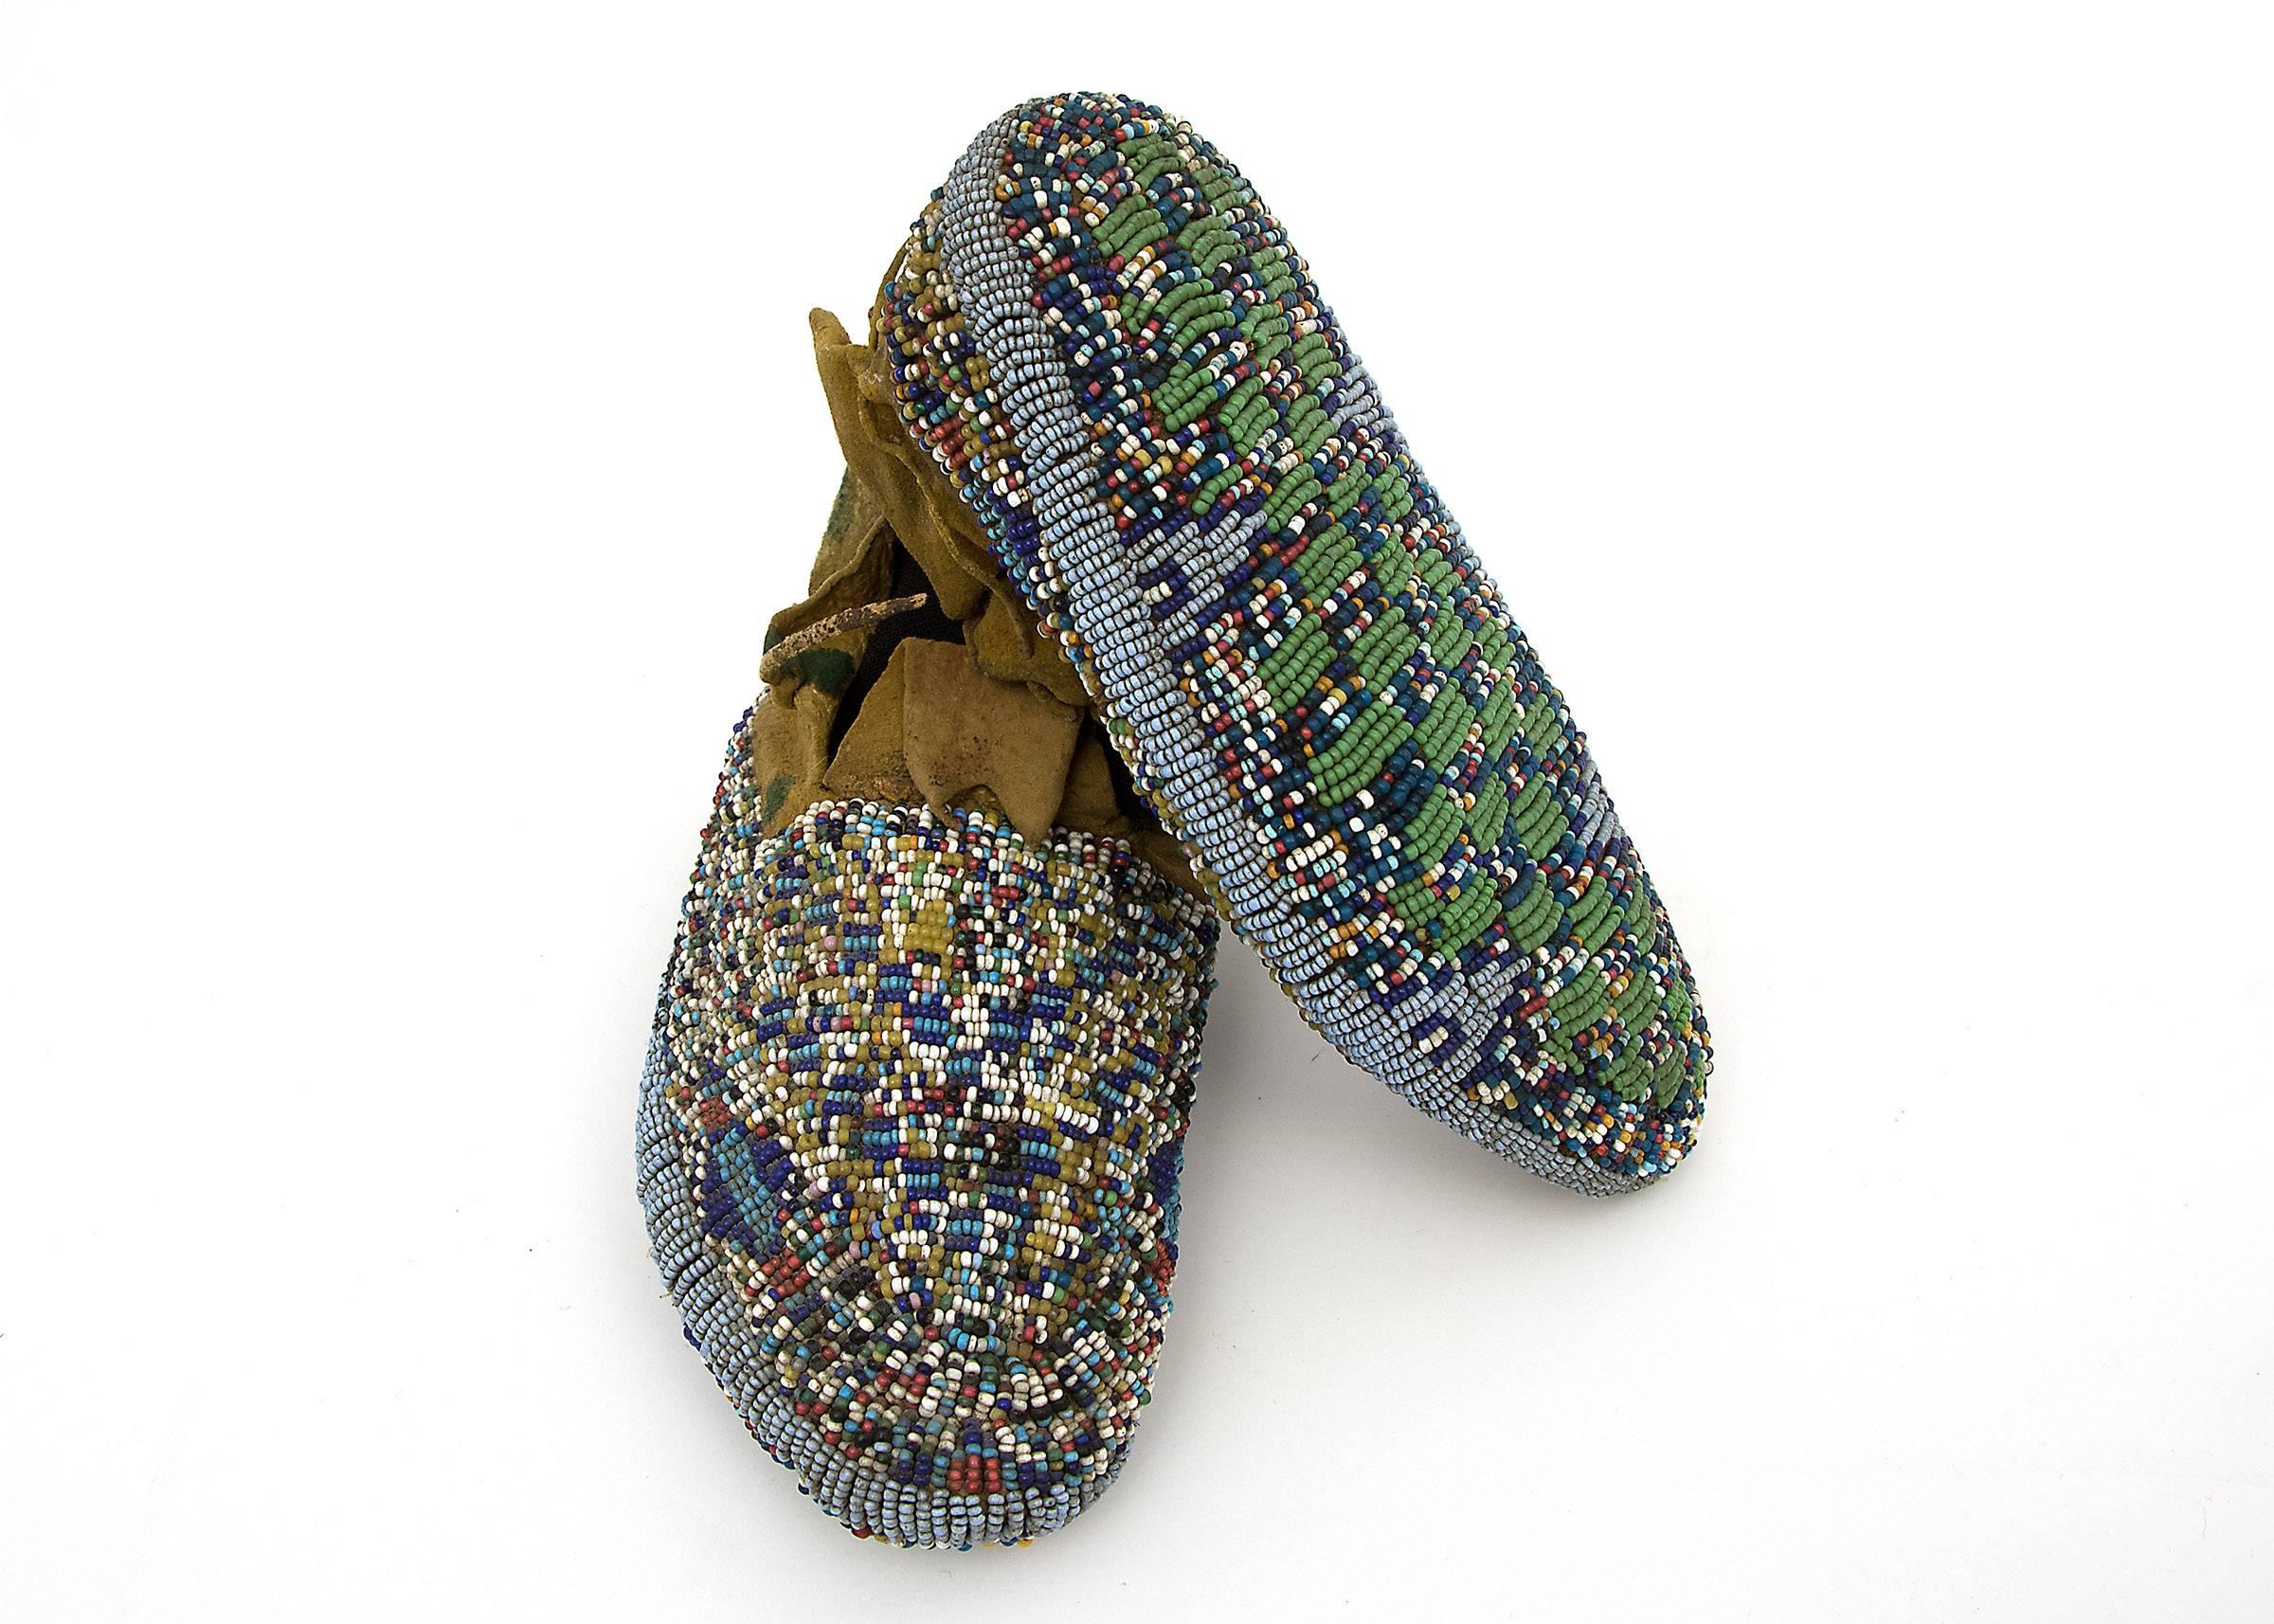 Meticulously created for a child, these ceremonial moccasins, were constructed from native tanned hide and elaborately decorated with multicolored glass trade beads. The soles are fully beaded, indicating that these were made for the child to wear